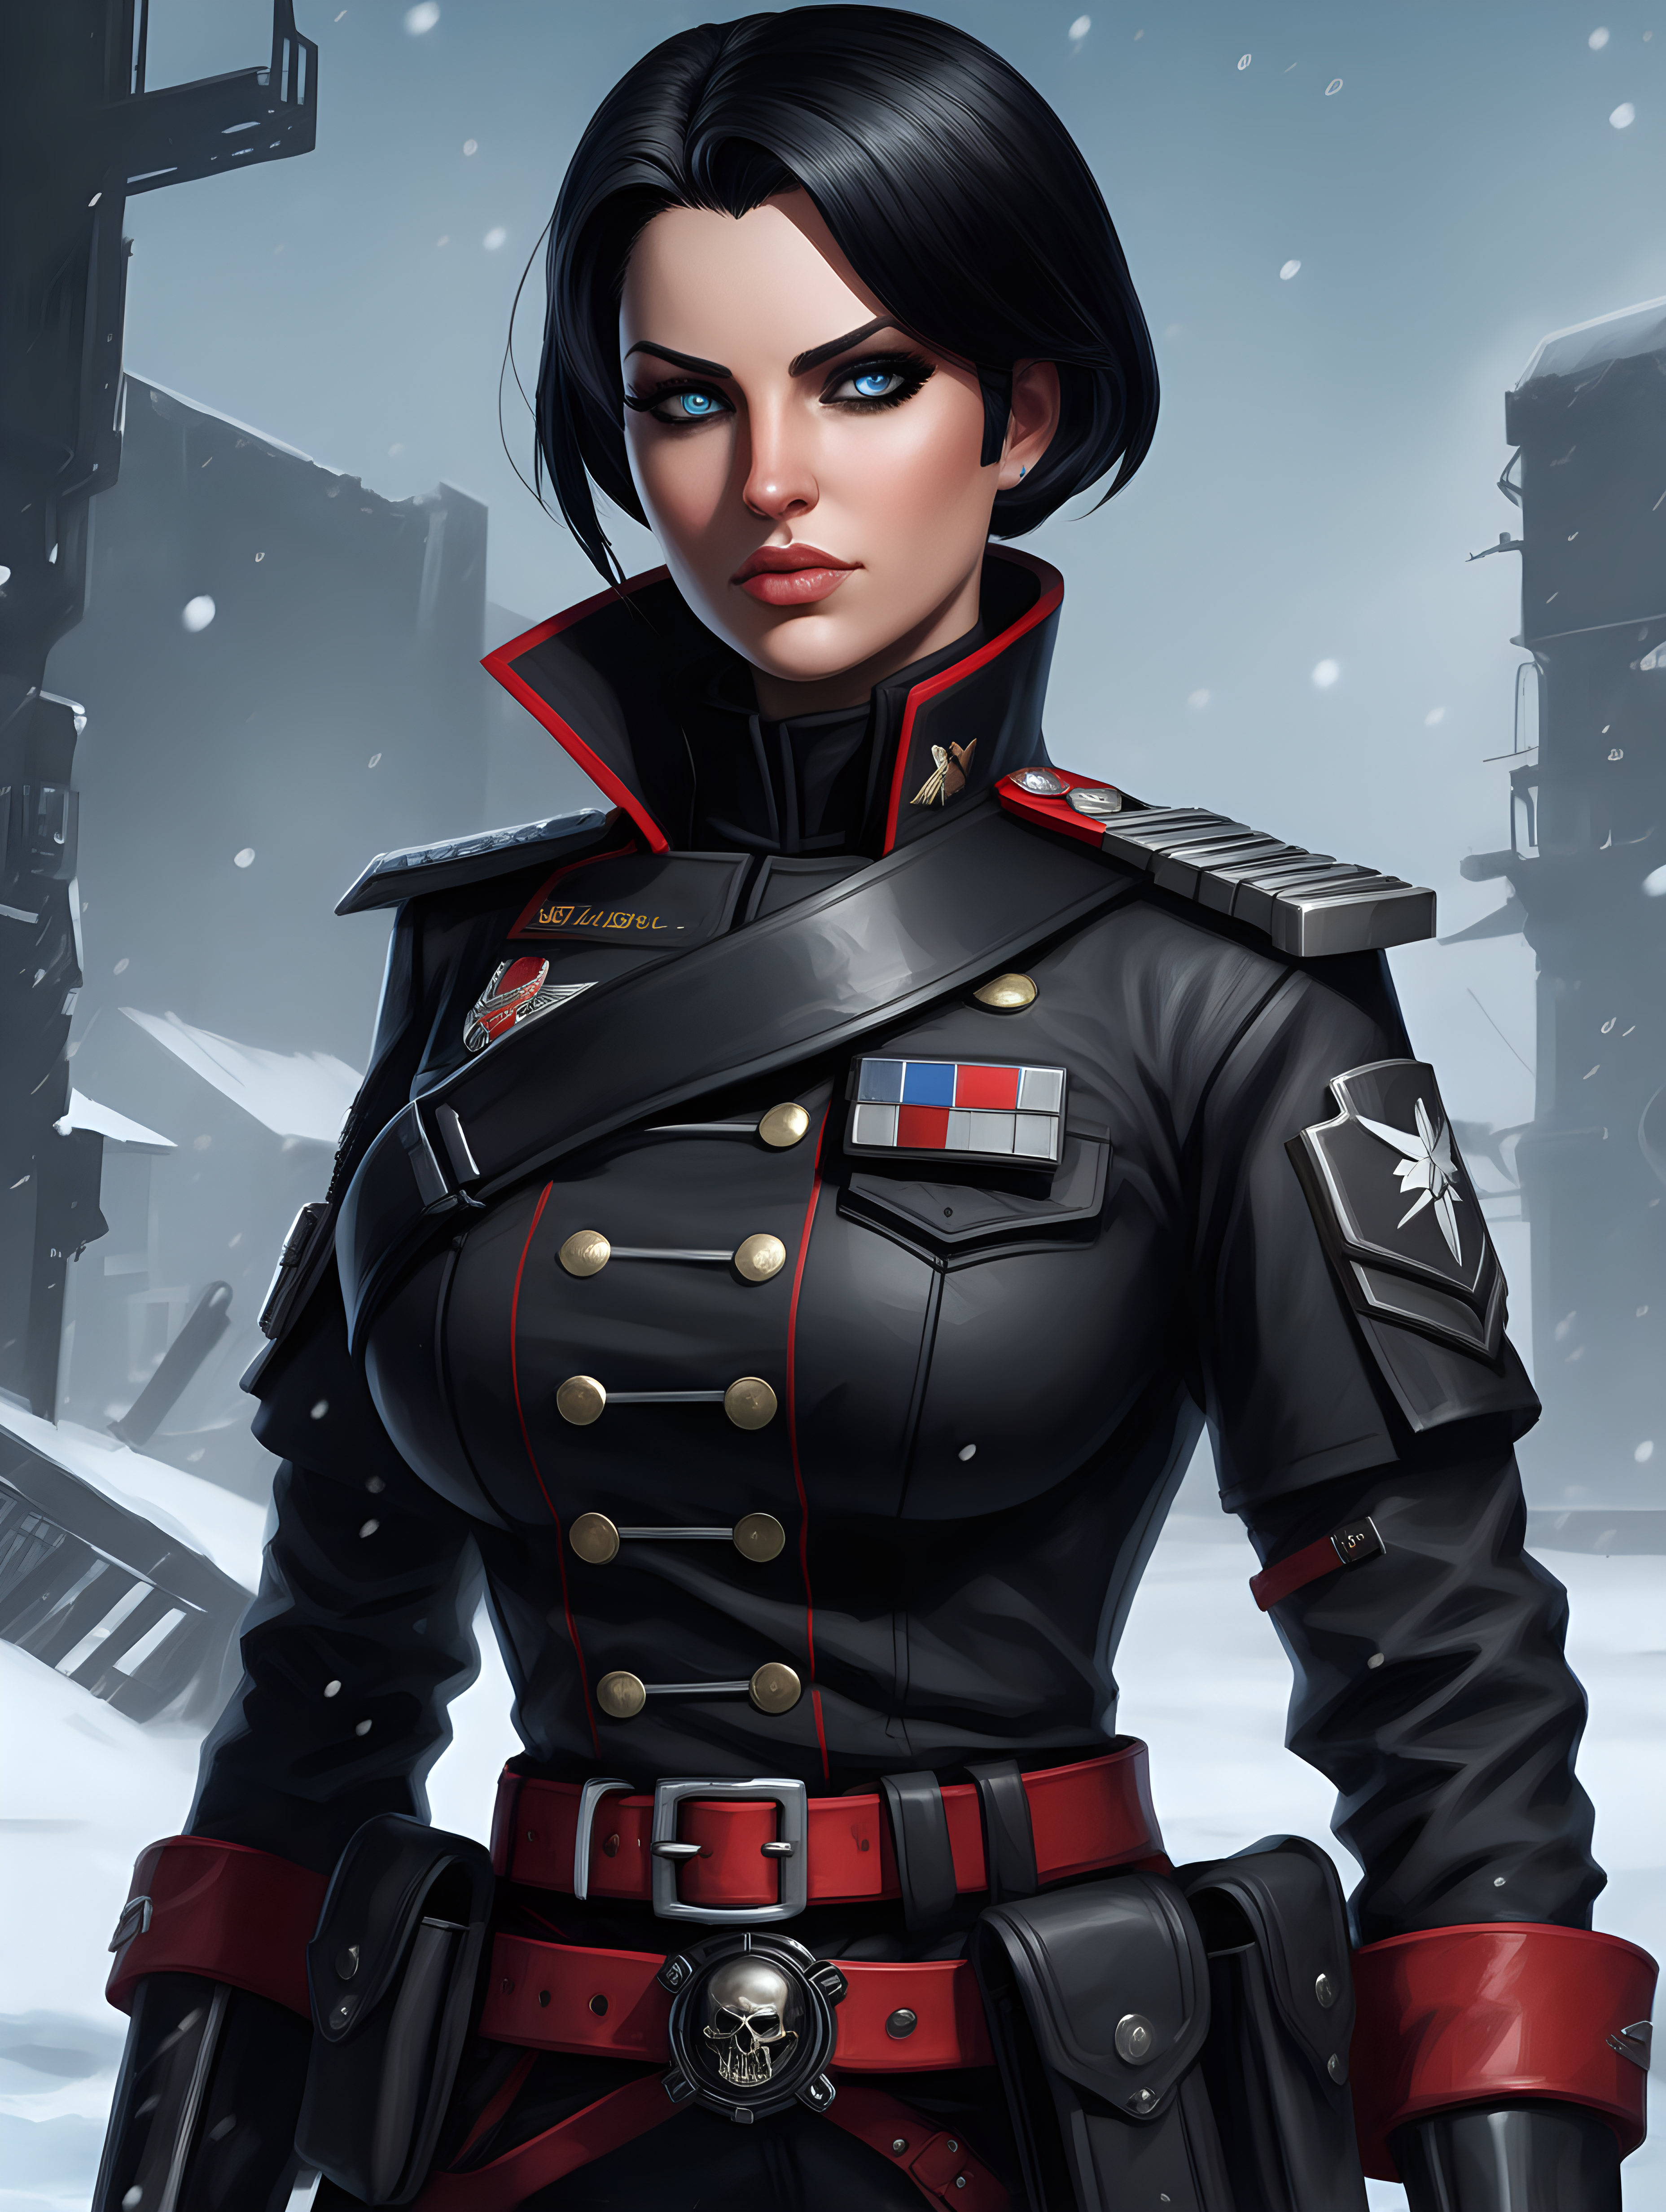 Warhammer 40K young busty Commissar woman. She has an hourglass shape. Her face looks like female Commander Shepard from Mass Effect. She has raven black hair. She has a very short hair style similar to what Zofia, from Rainbow Six Siege, has. Dark black uniform. Belt has a lot of pouches, grenades, black pistol magazines, and a black holster attached. Bandolier around waist. Her dark black uniform jacket fits perfectly, fully closed and a single line of buttons. She has a lot of eye shadow. Background scene is snowy trench line. She has icy blue eyes.